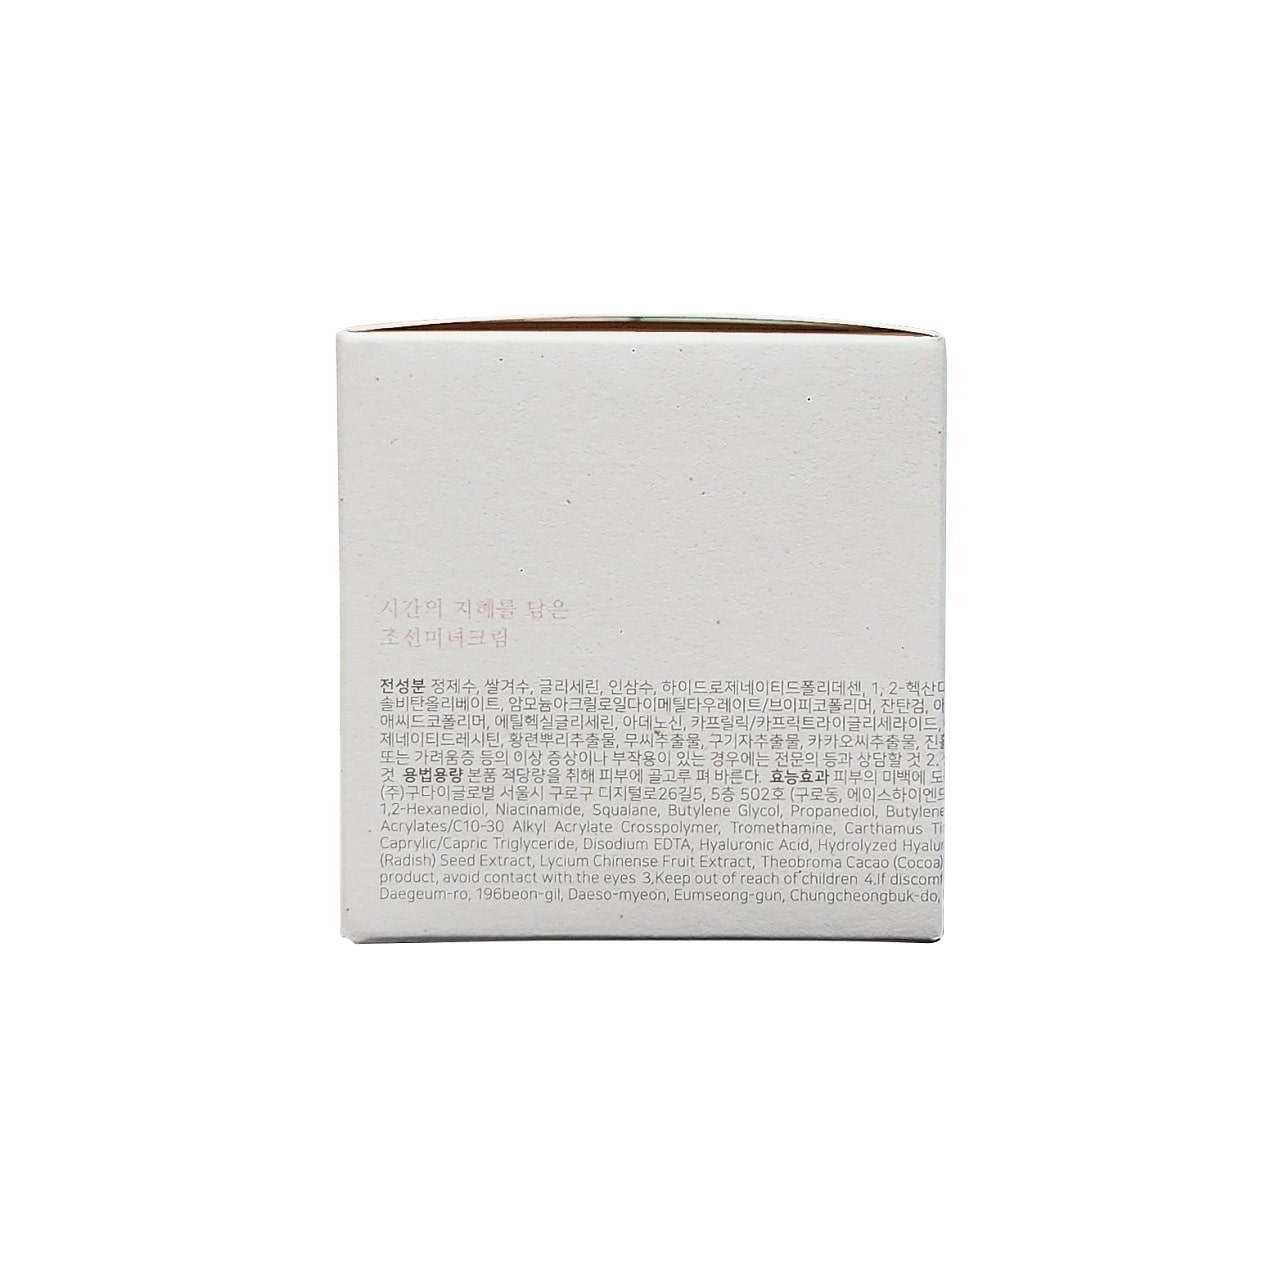 Description, directions, ingredients for Beauty of Joseon Dynasty Cream (50 mL) 1 of 3